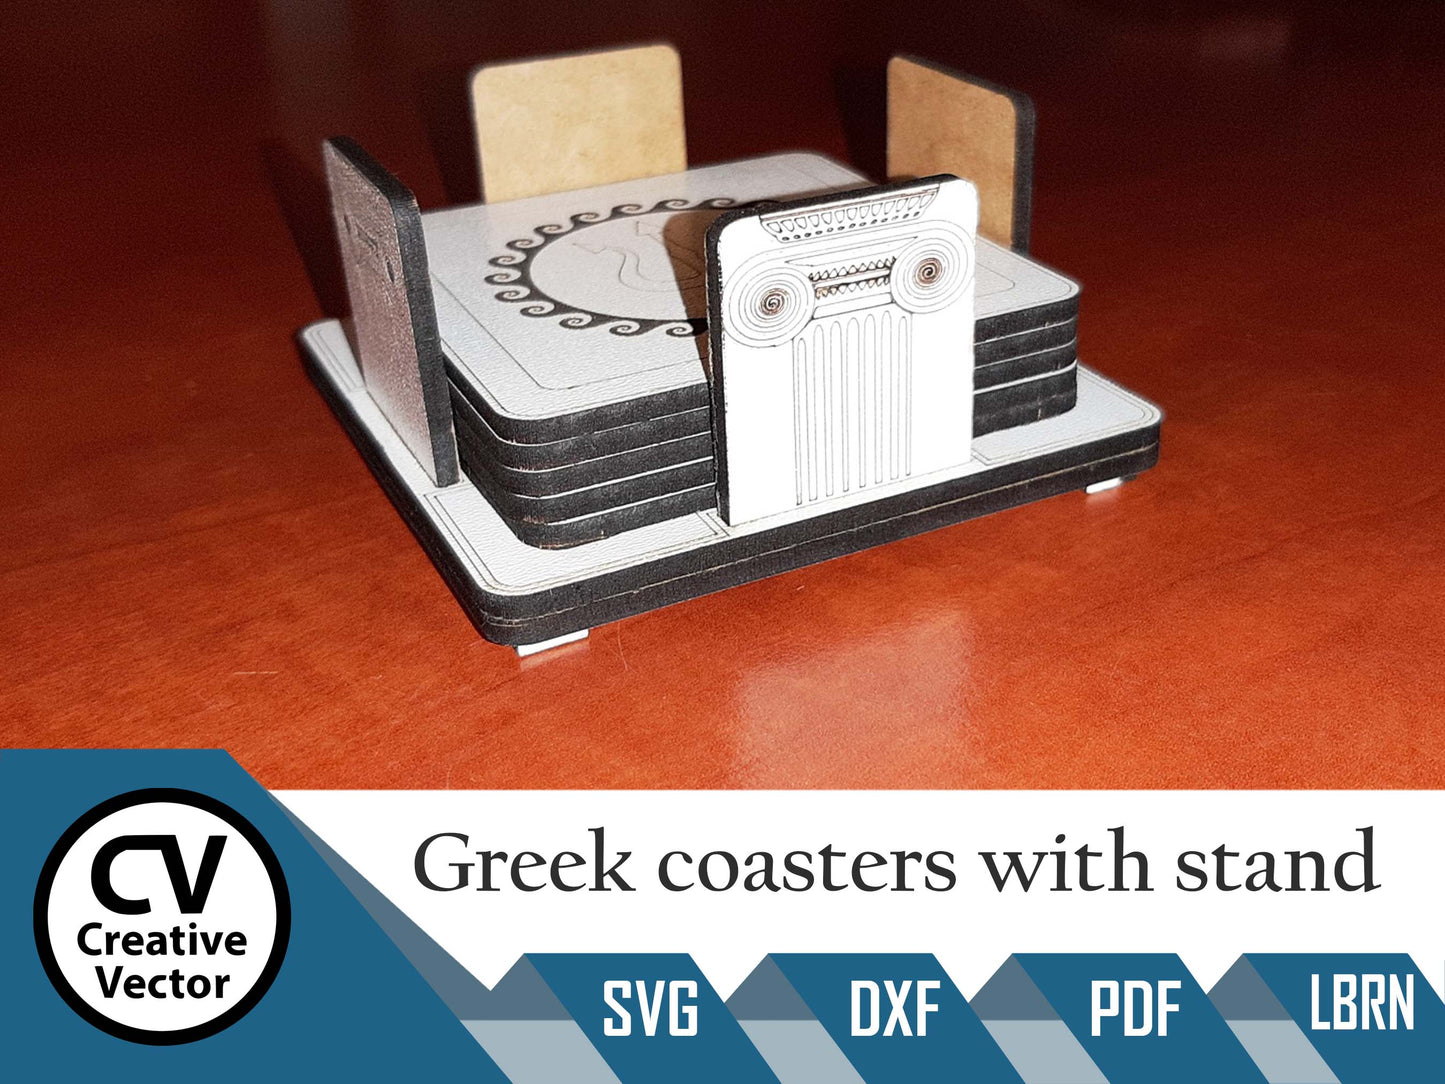 5 designs of Greek coasters with stand